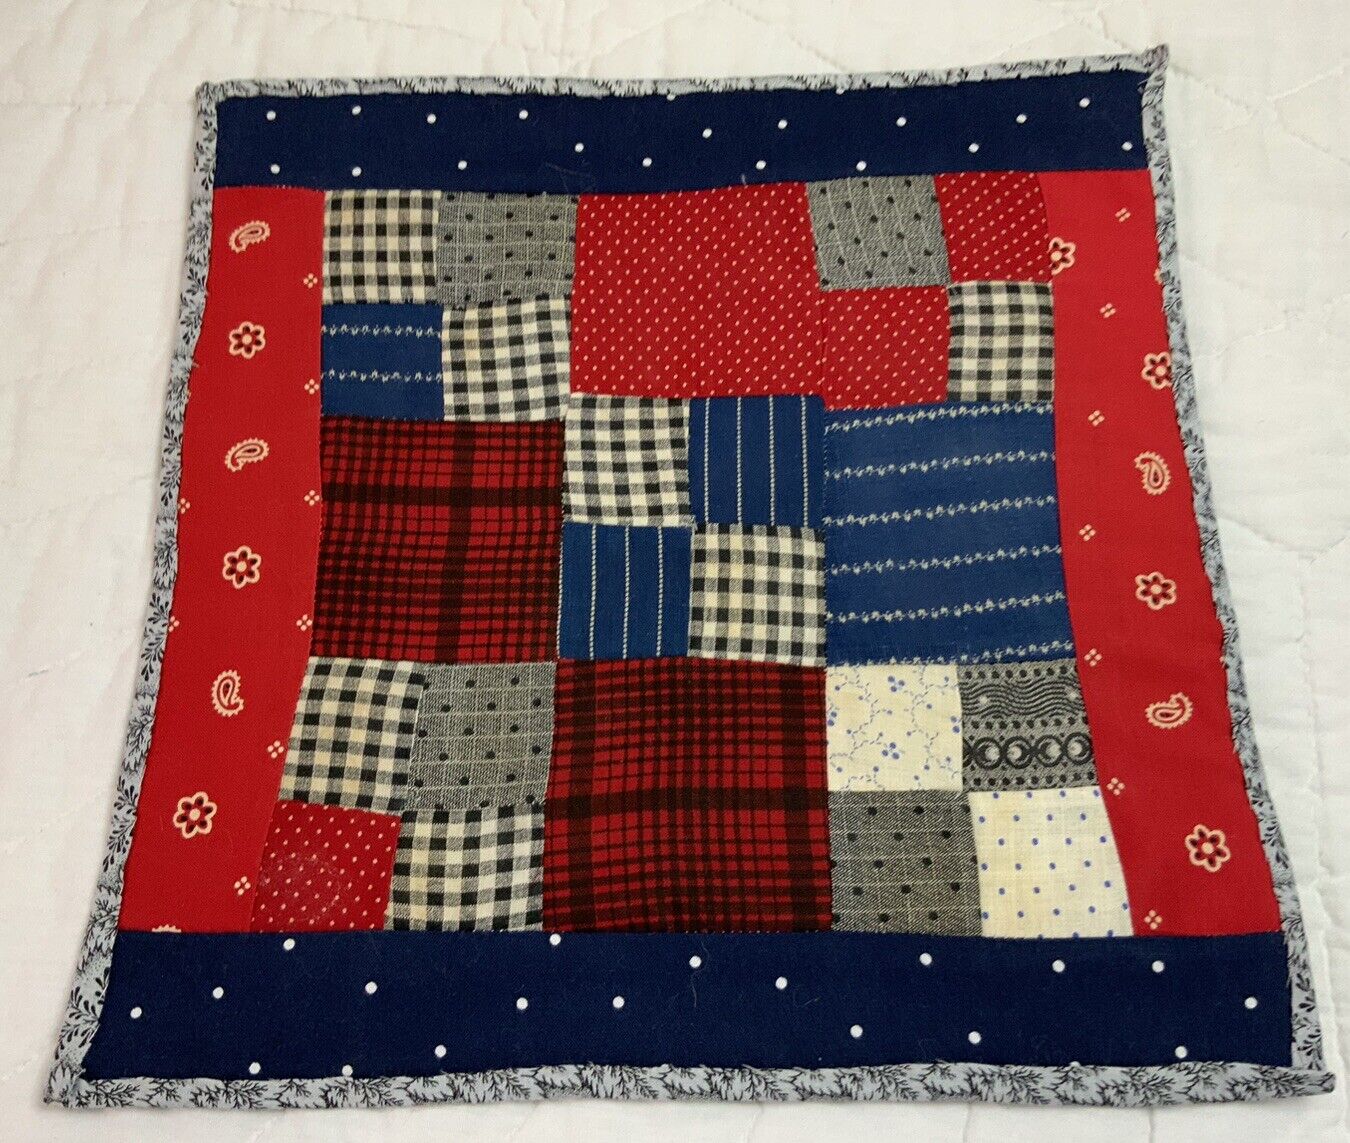 Vintage Antique Patchwork Quilt Table Topper Or Wall Hanging, Nine Patch, Multi